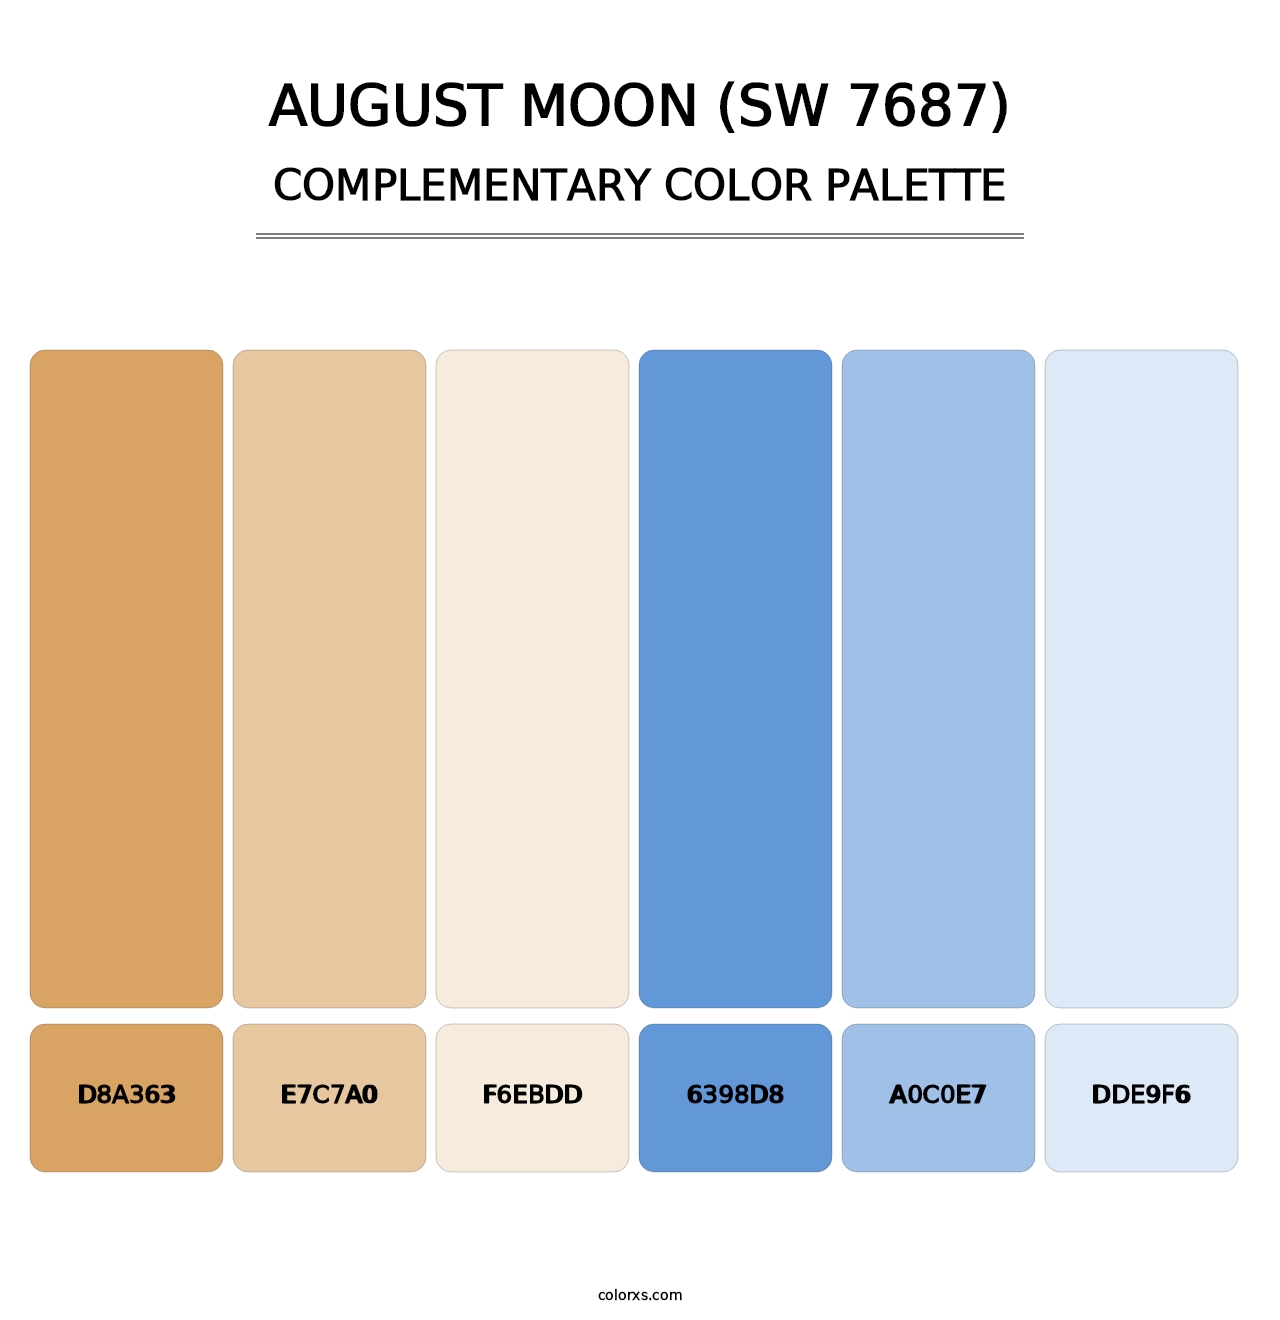 August Moon (SW 7687) - Complementary Color Palette